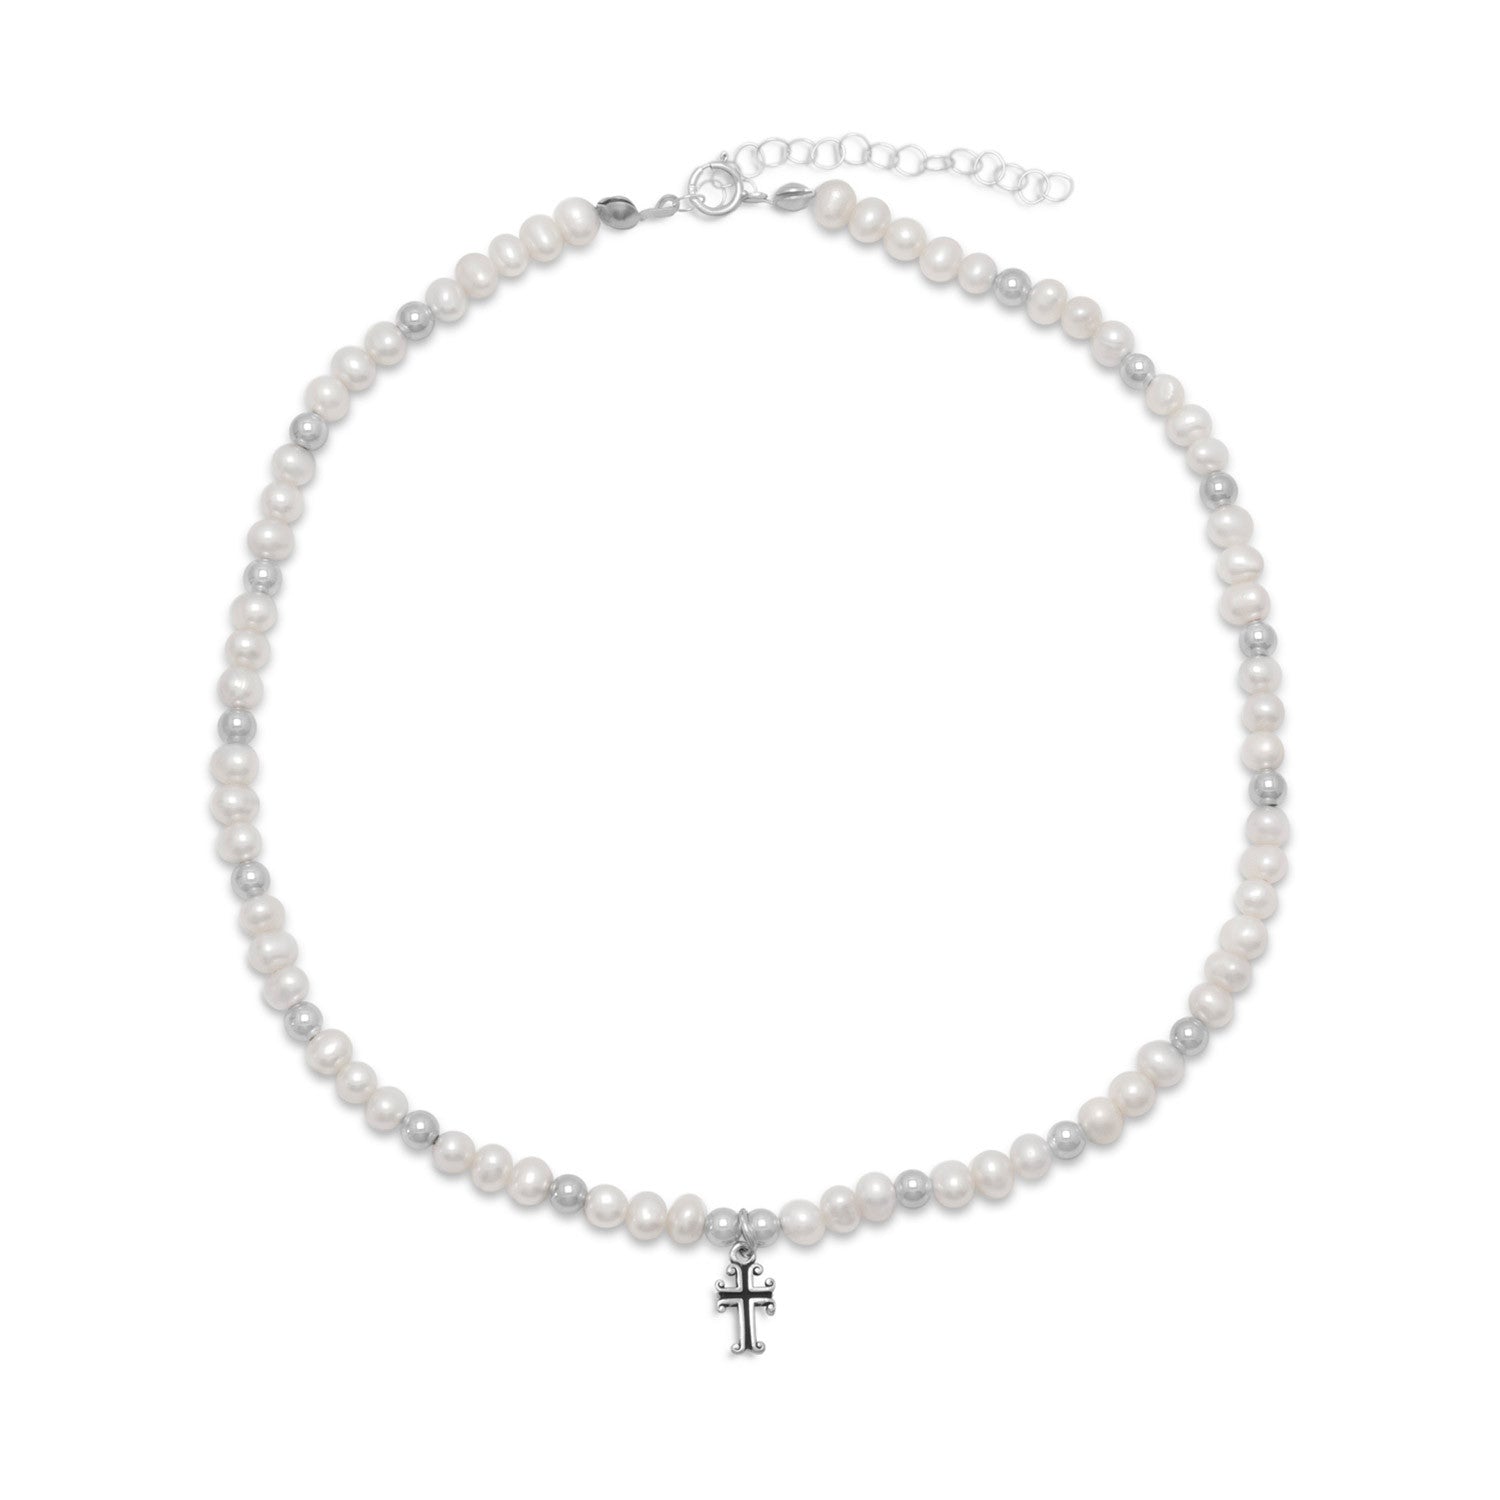 13" +2" Extension White Cultured Freshwater Pearl and Silver Bead Necklace with Cross Drop